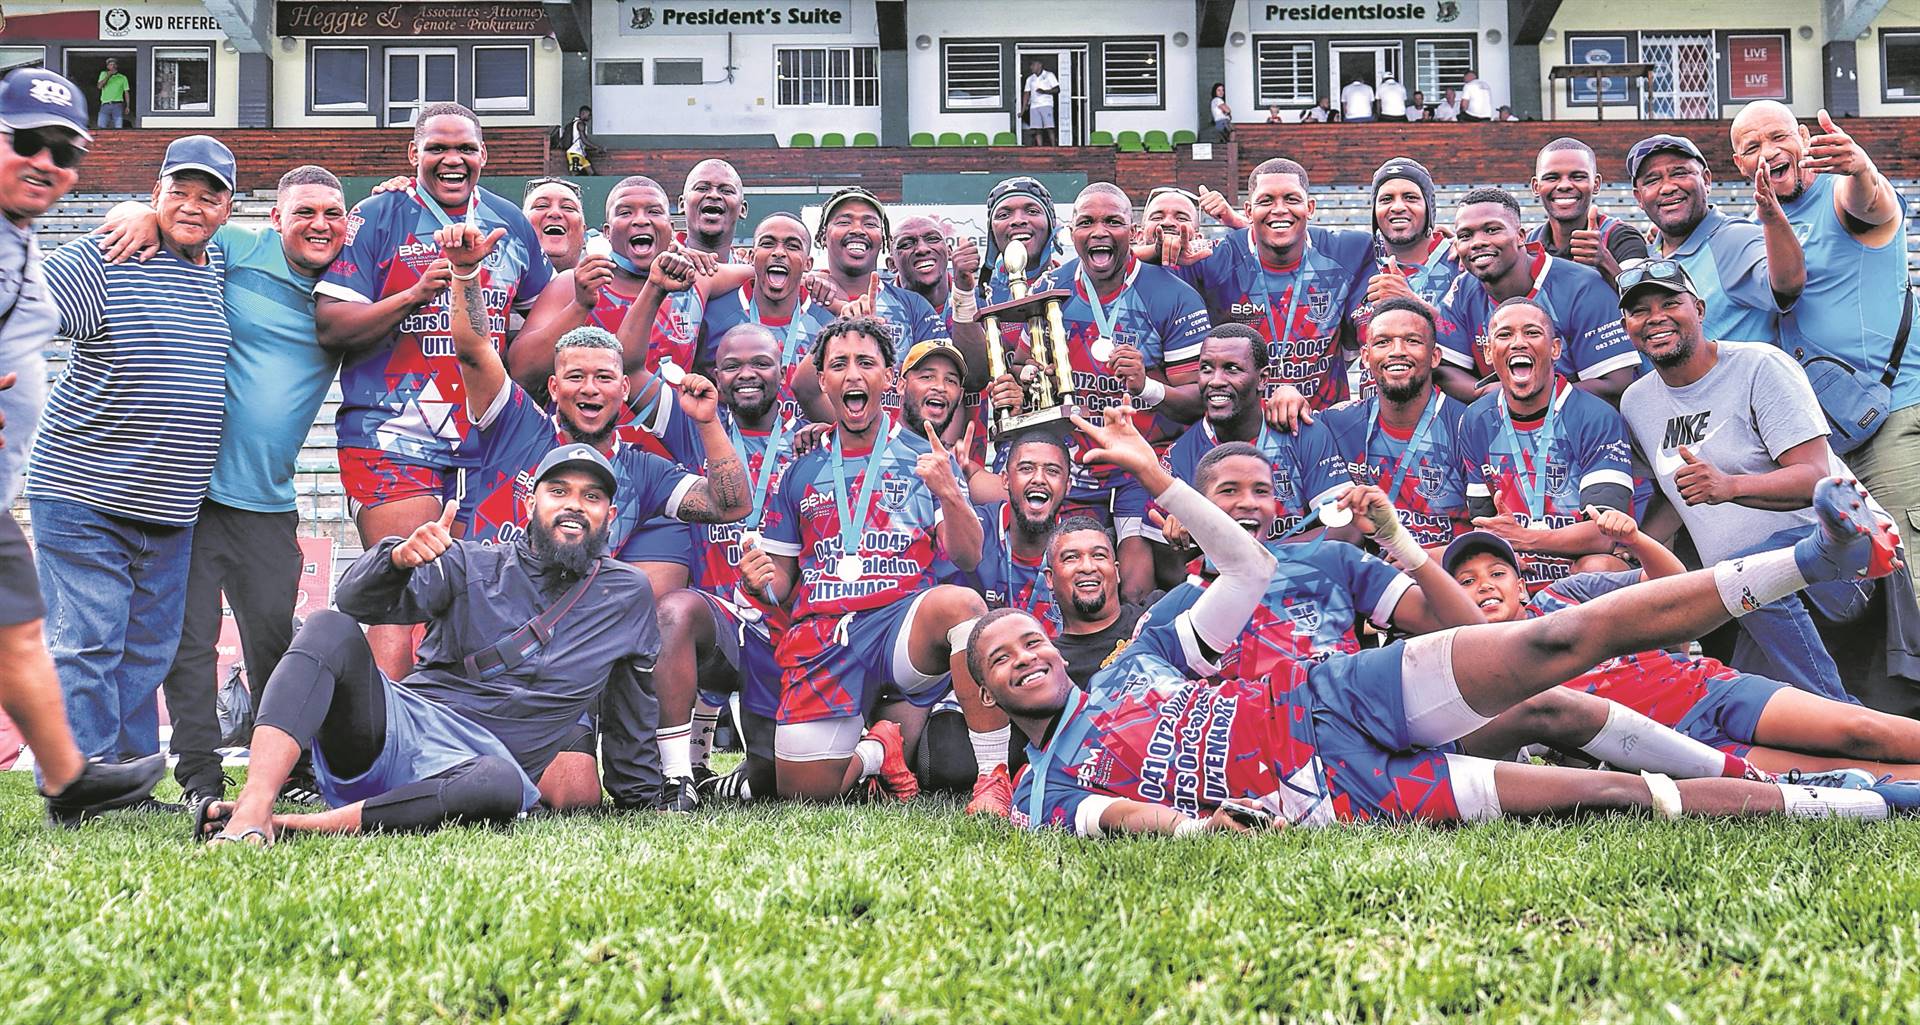 Uitenhage Tens Team in its George Tens Sport and Lifestyle Festival debut was crowned the ten-a-side champion in the semi-professional division.                    